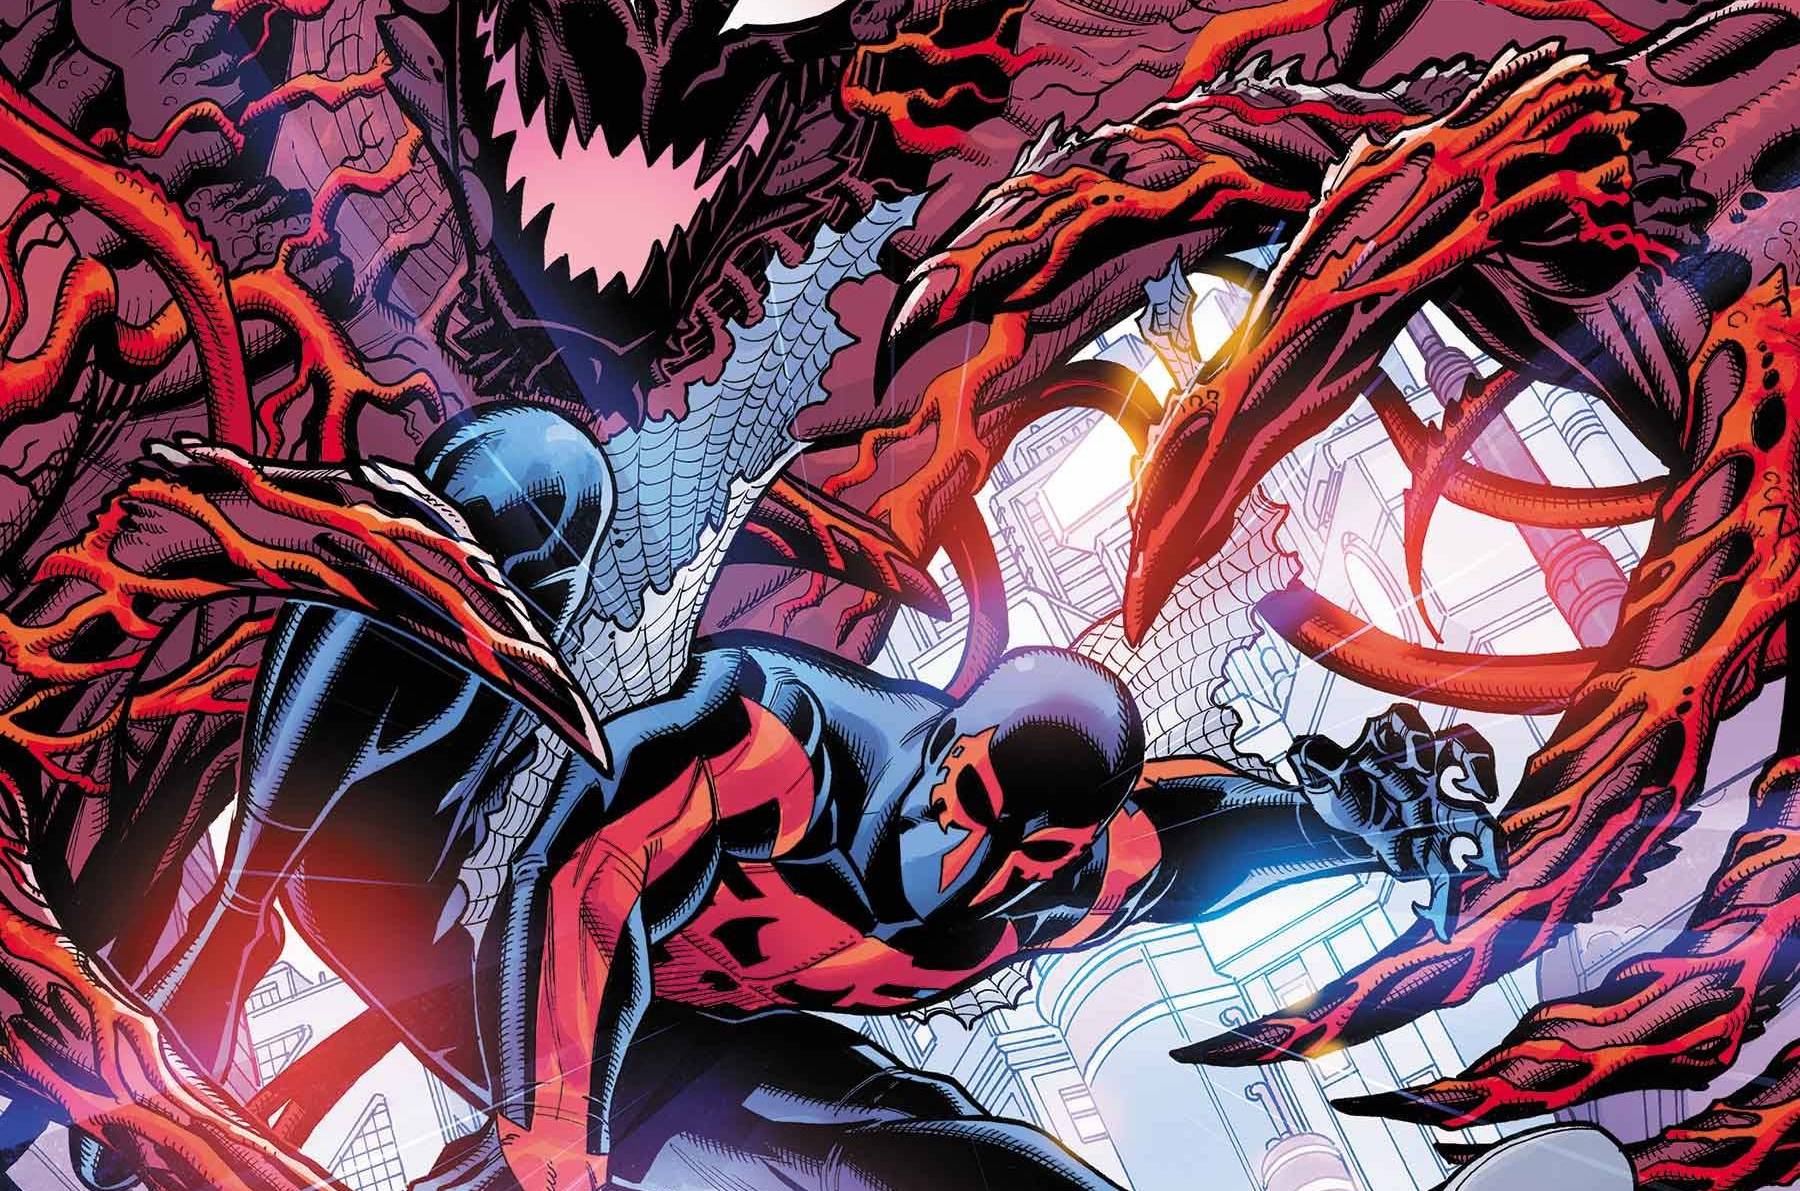 'Spider-Man 2099: Dark Genesis' #1 comes out swinging with Carnage 2099